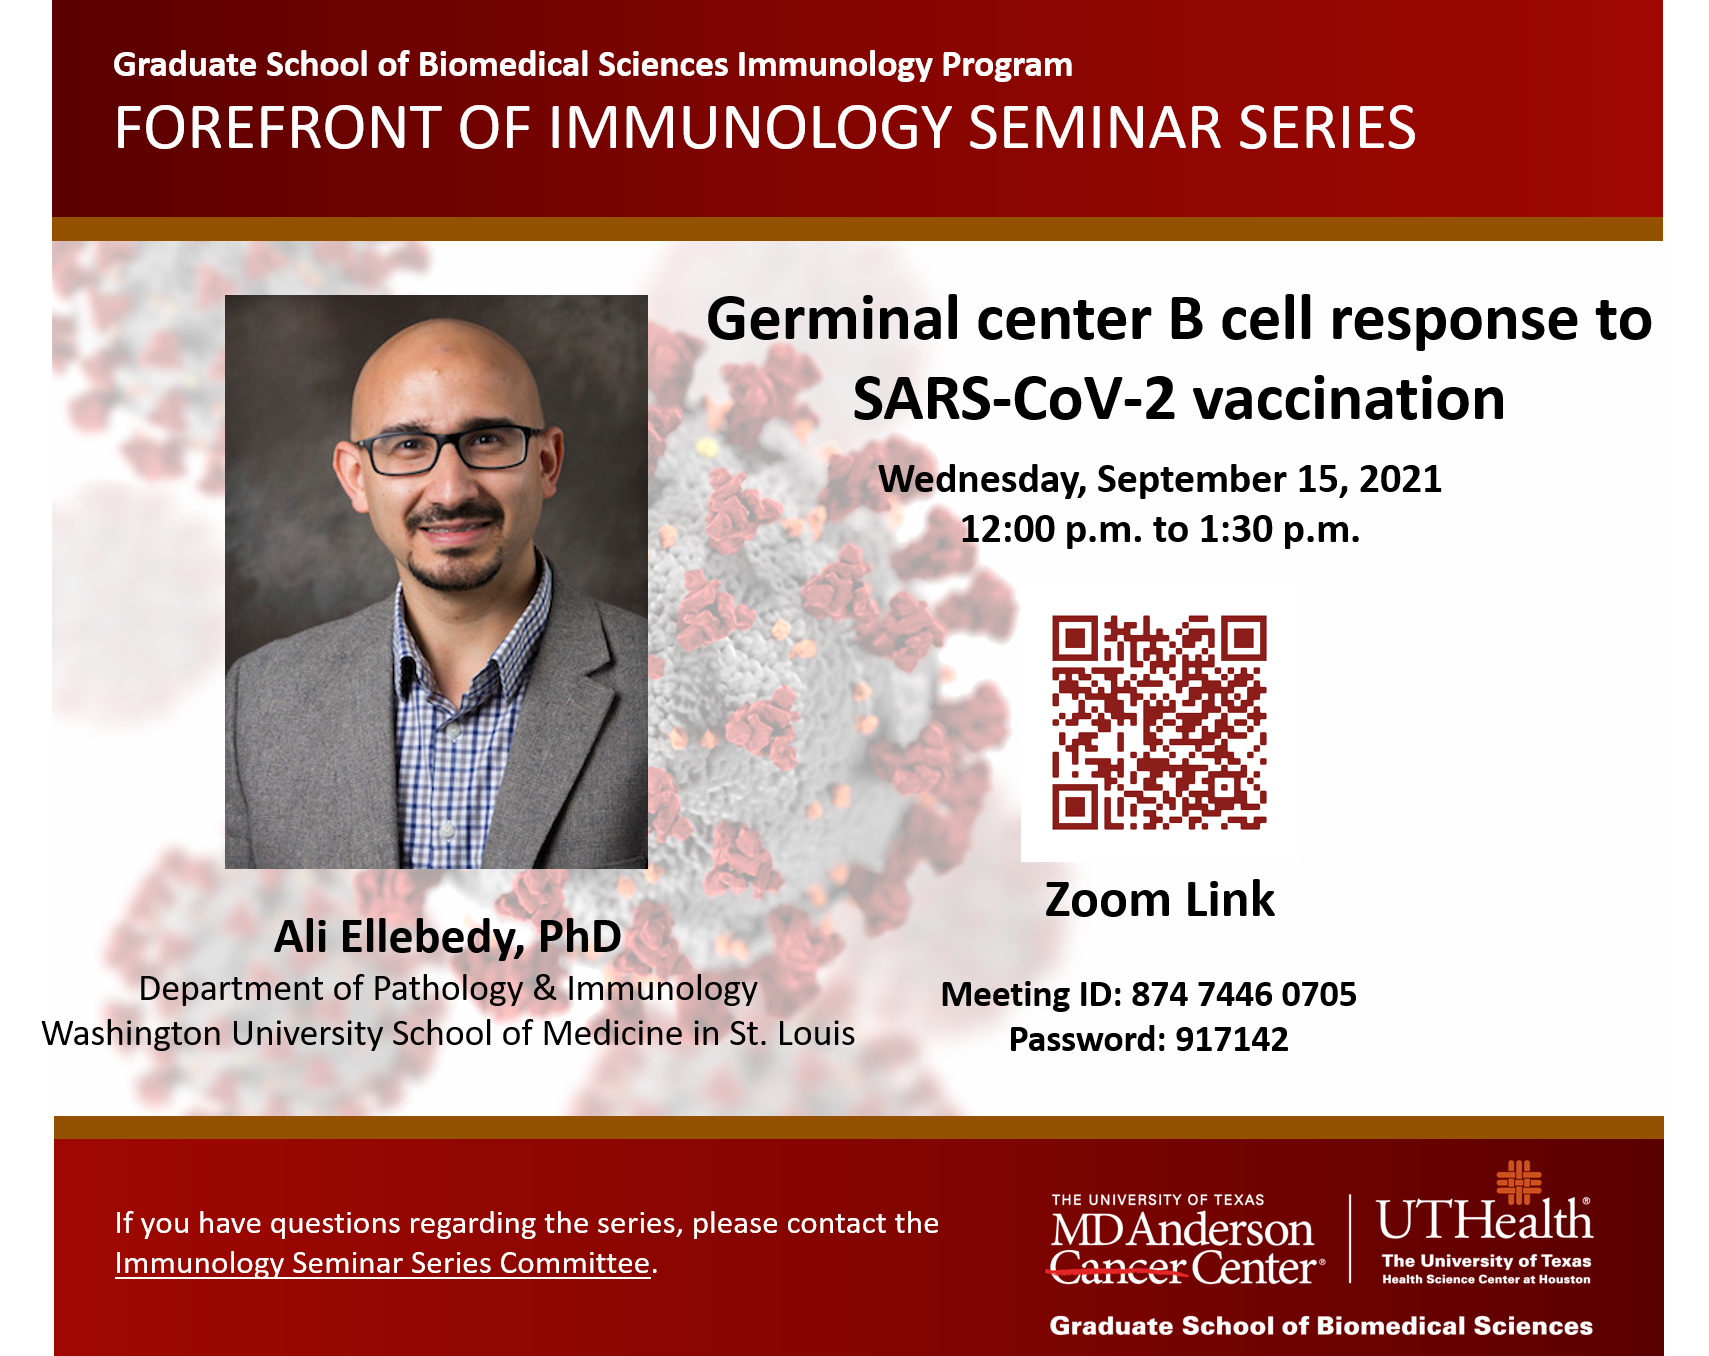 Forefront of Immunology Seminar Series Announcement for September 15